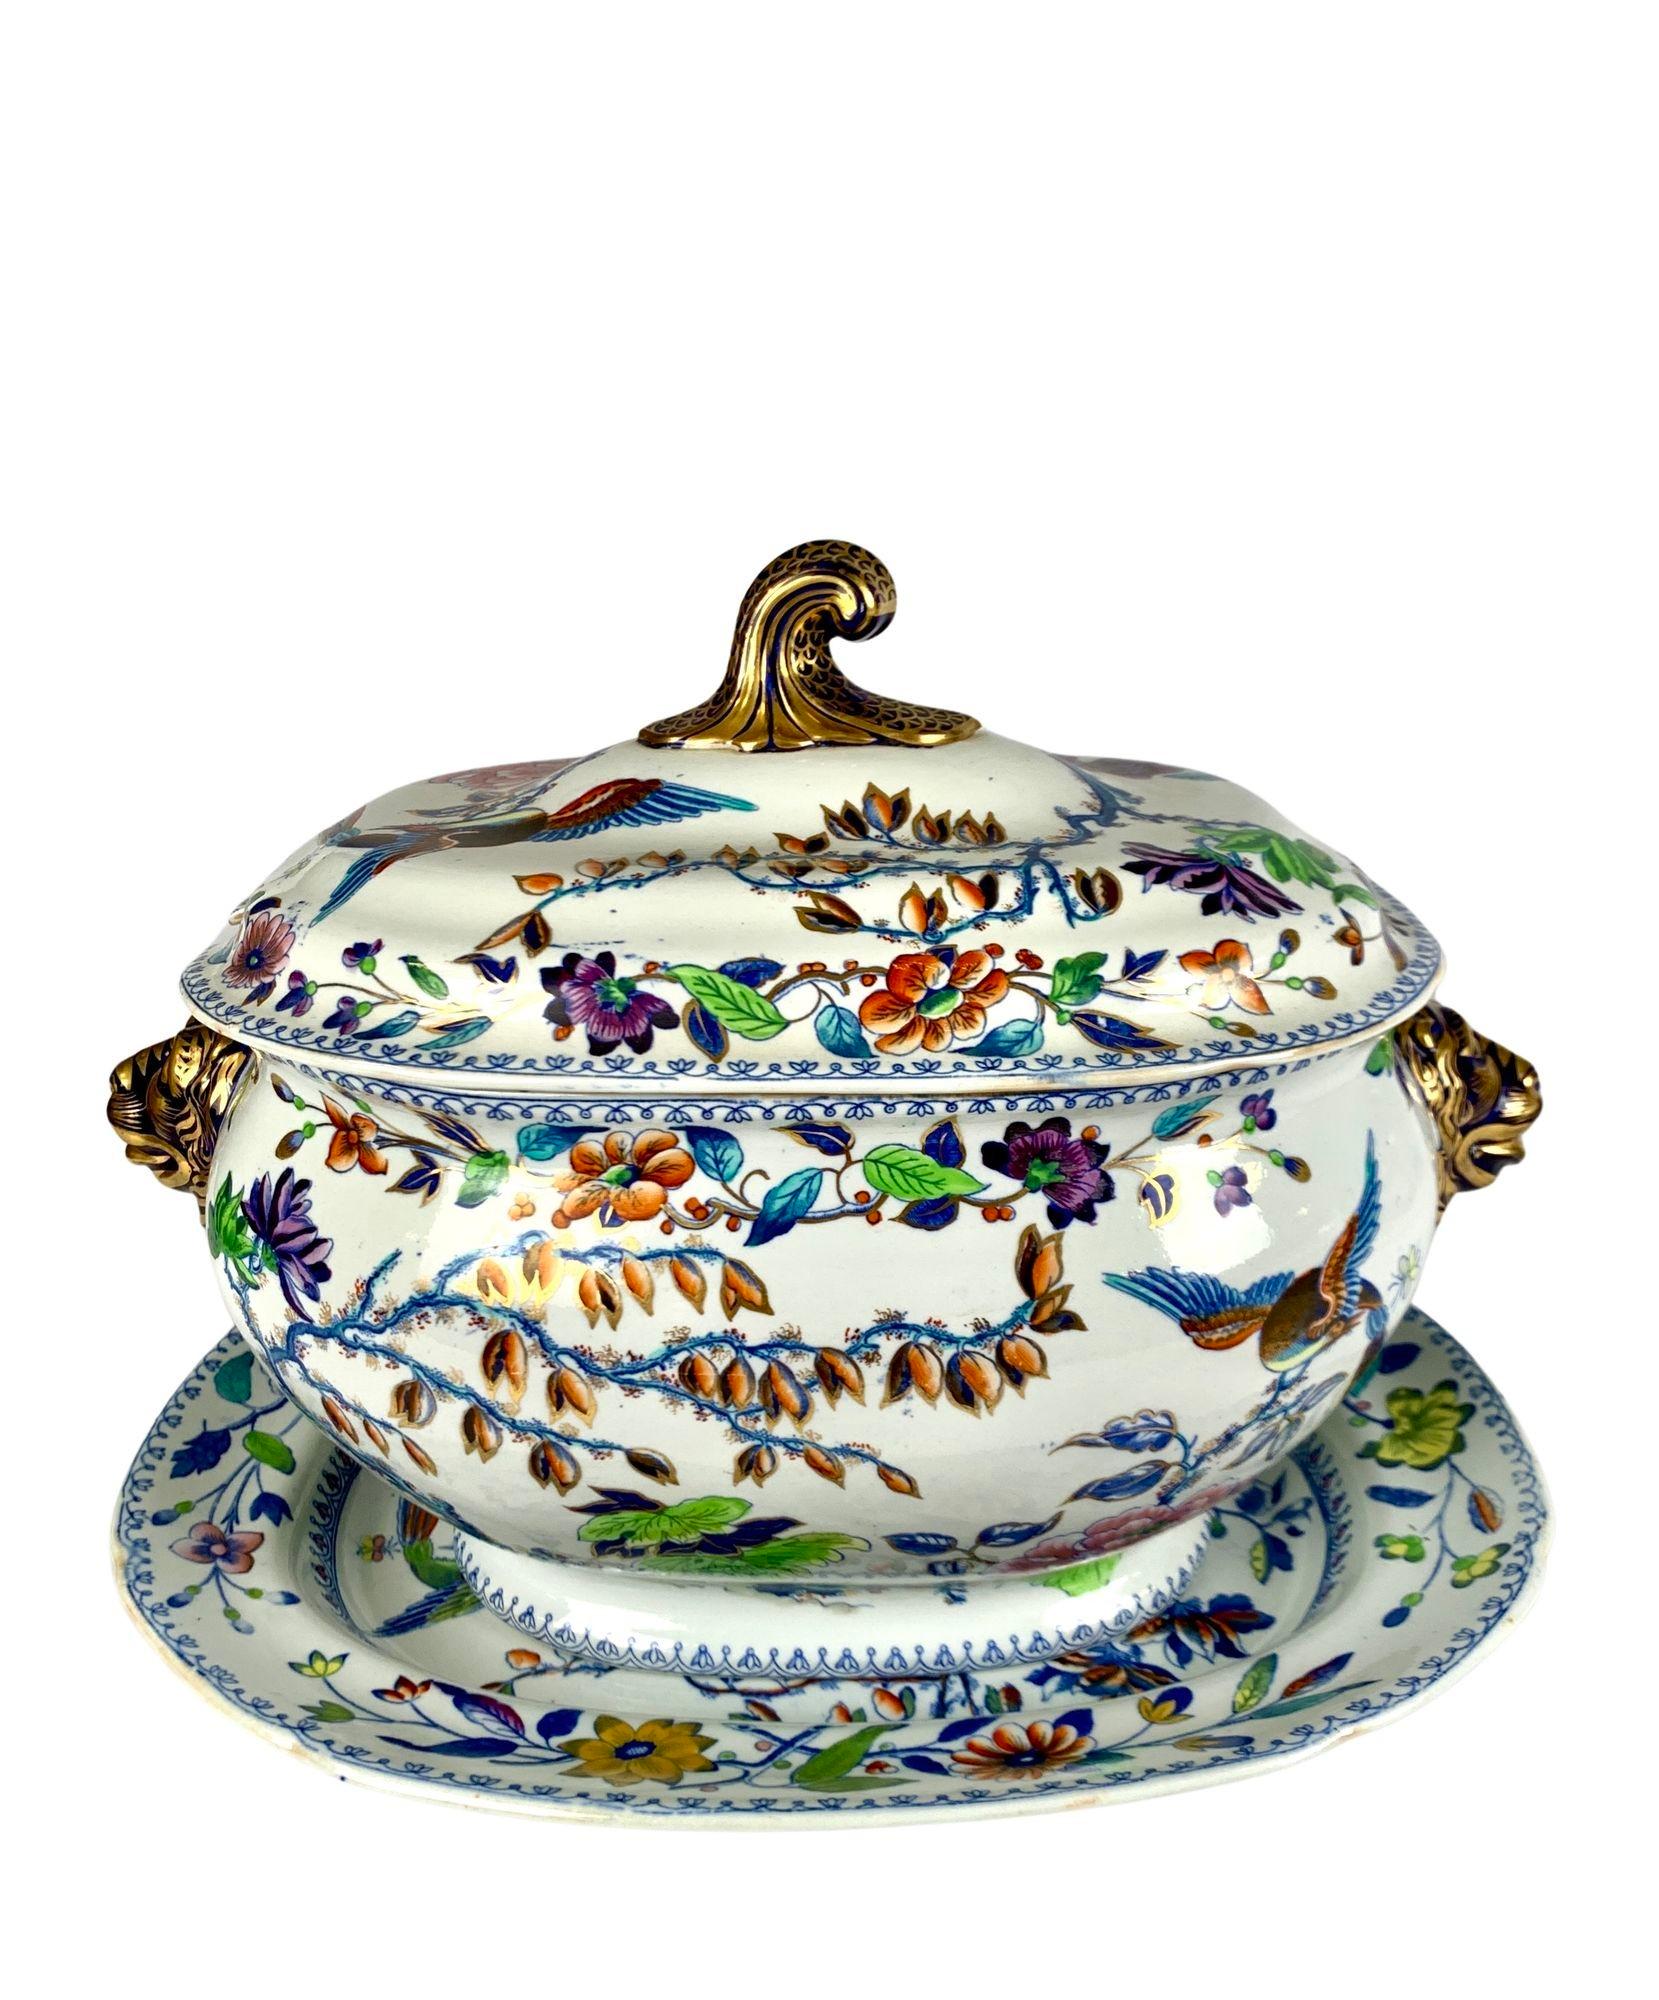 The Davenport flying bird pattern has been much sought after since it was first made in England circa 1813.
This lively and colorful pattern features an elegant bird with a long tail flying above a garden with exquisite leaves and beautiful